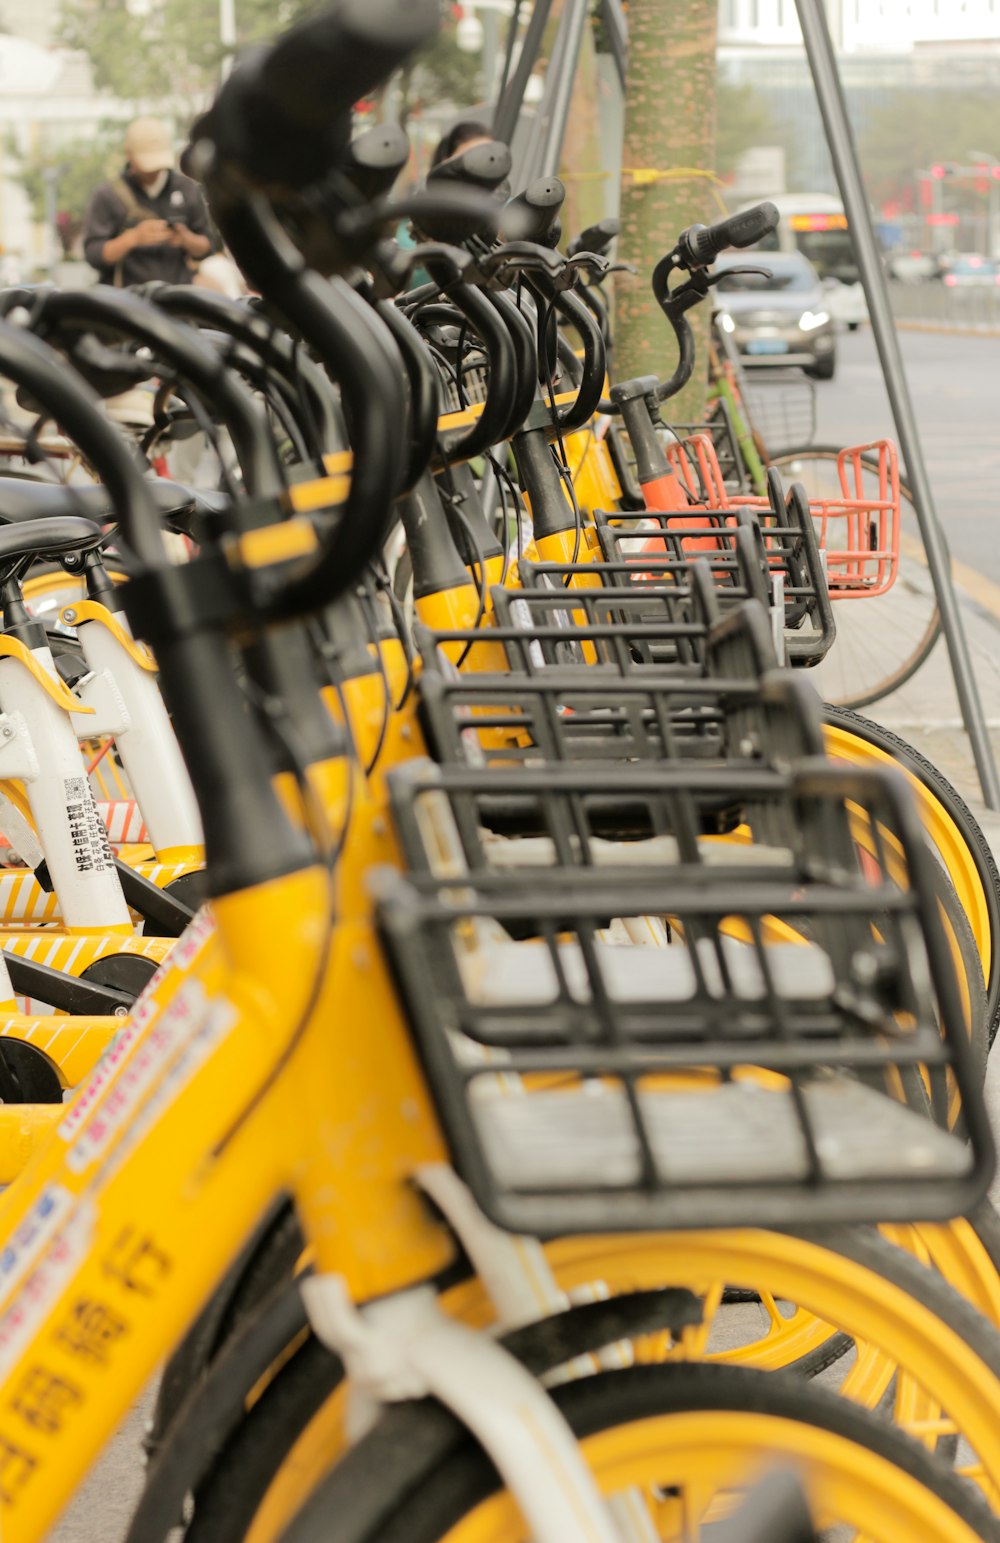 a row of yellow bicycles parked next to each other